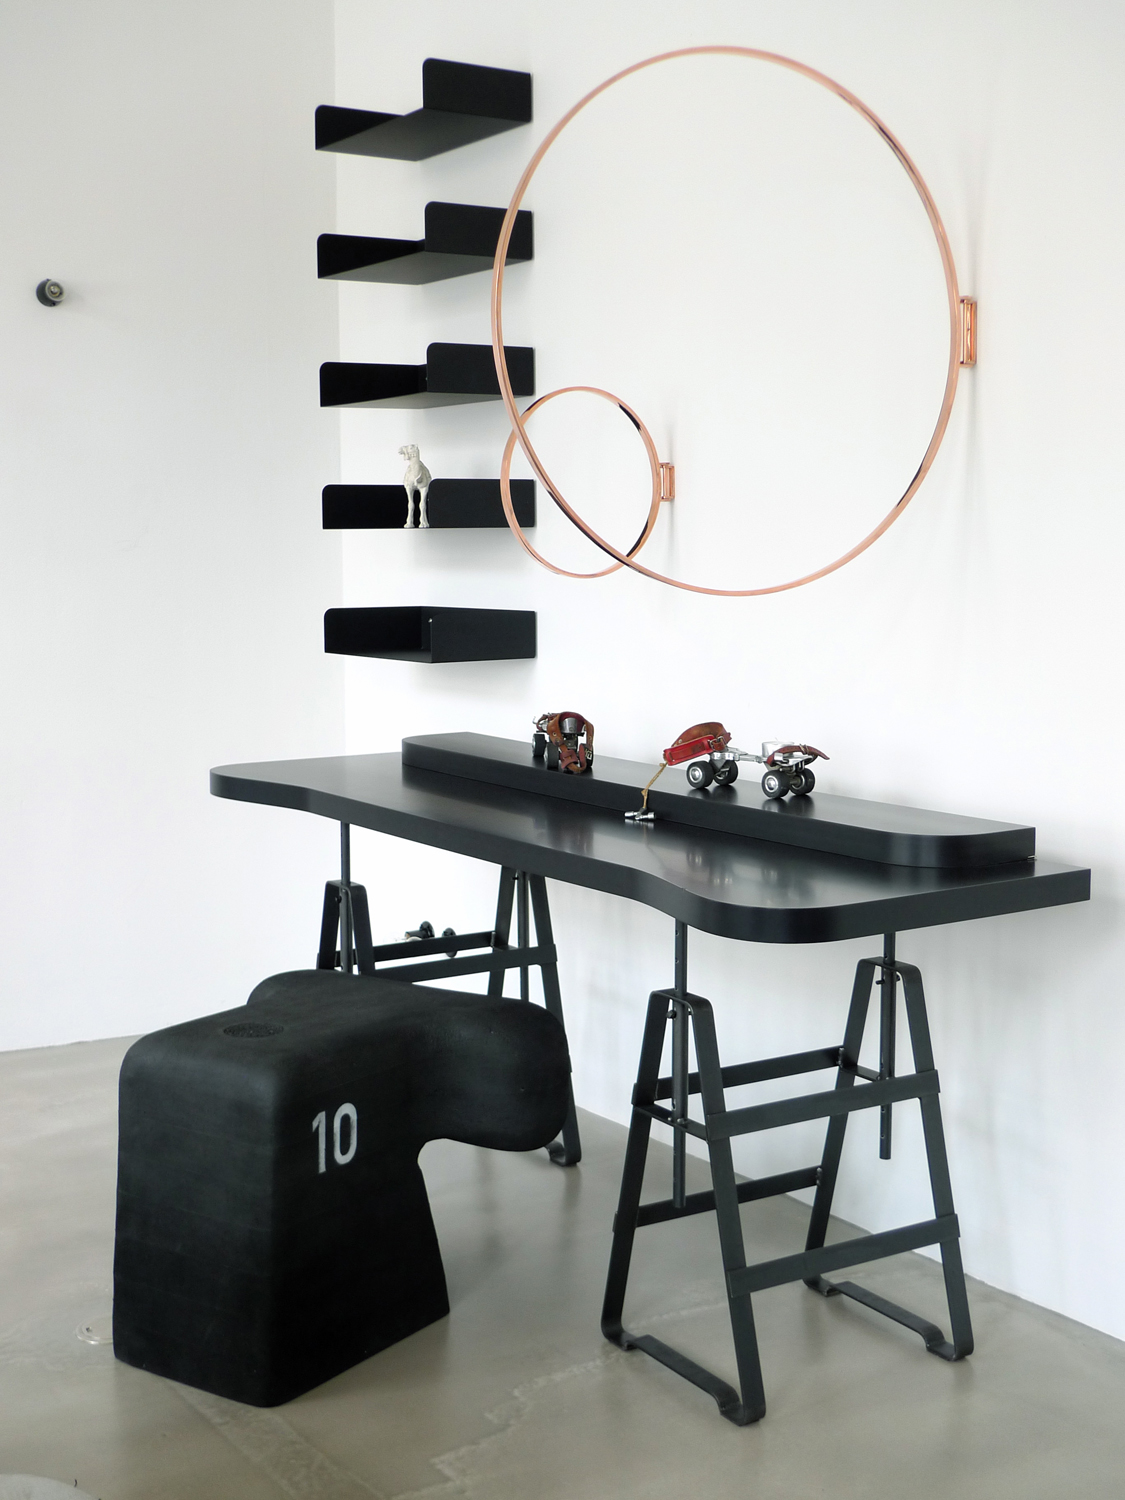 A height adjustable trestle made from oiled crude steel. It is applicable with several shelves and slabs. The same variable as Affe but powder-coated plays Lackaffe with the image of solid steel furniture.